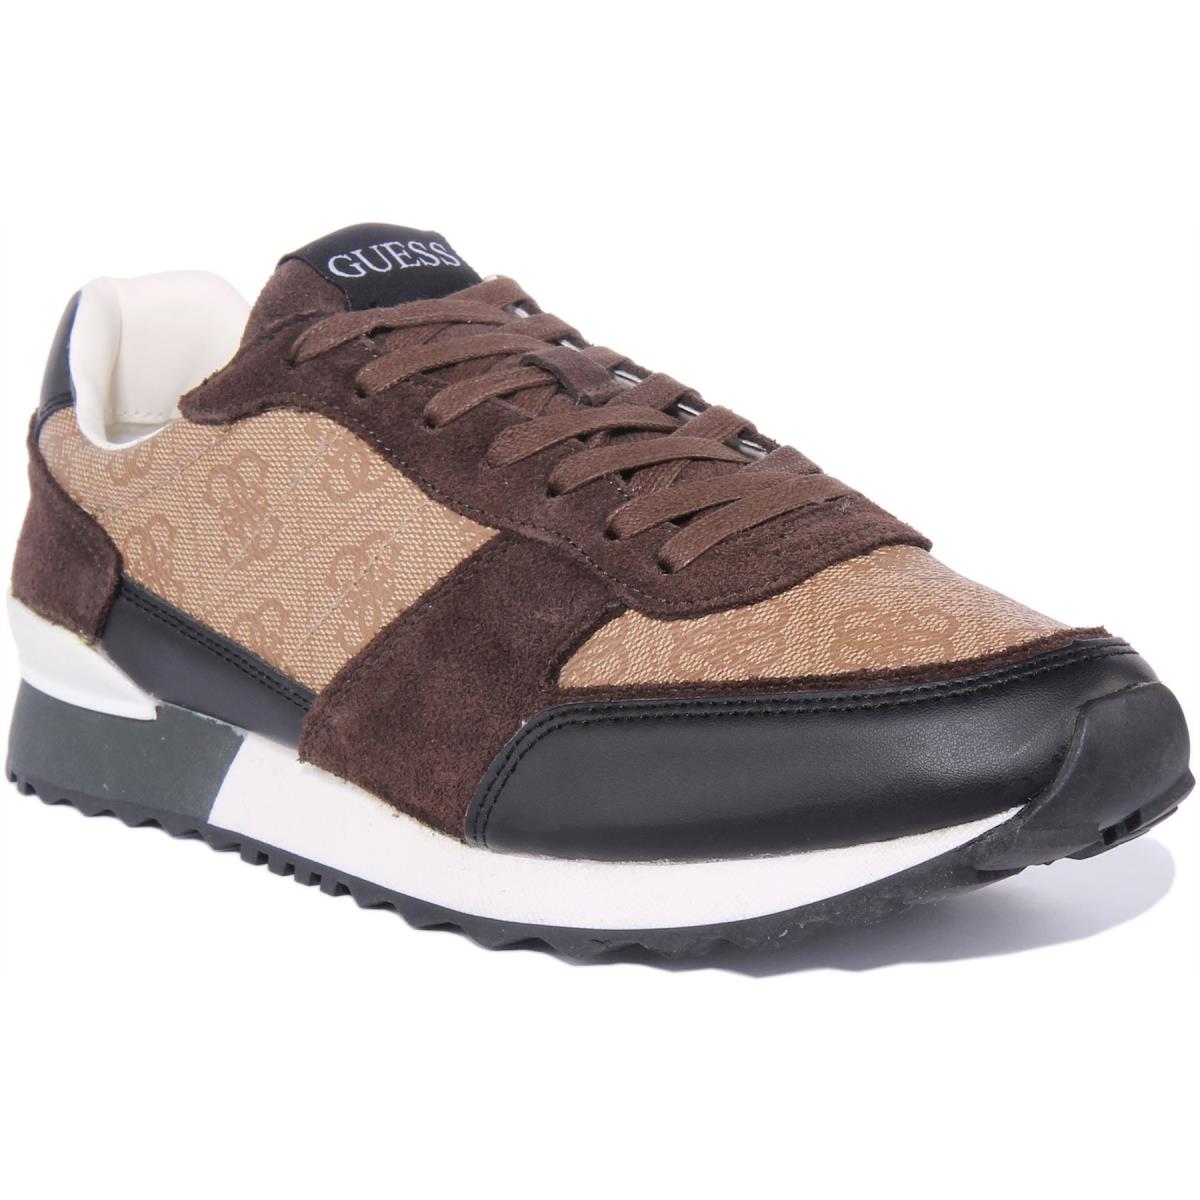 Guess Fm6Pdvfal12 Mens Lace Up Runner Inspired Sneakers In Brown Size US 7 - 13 BROWN